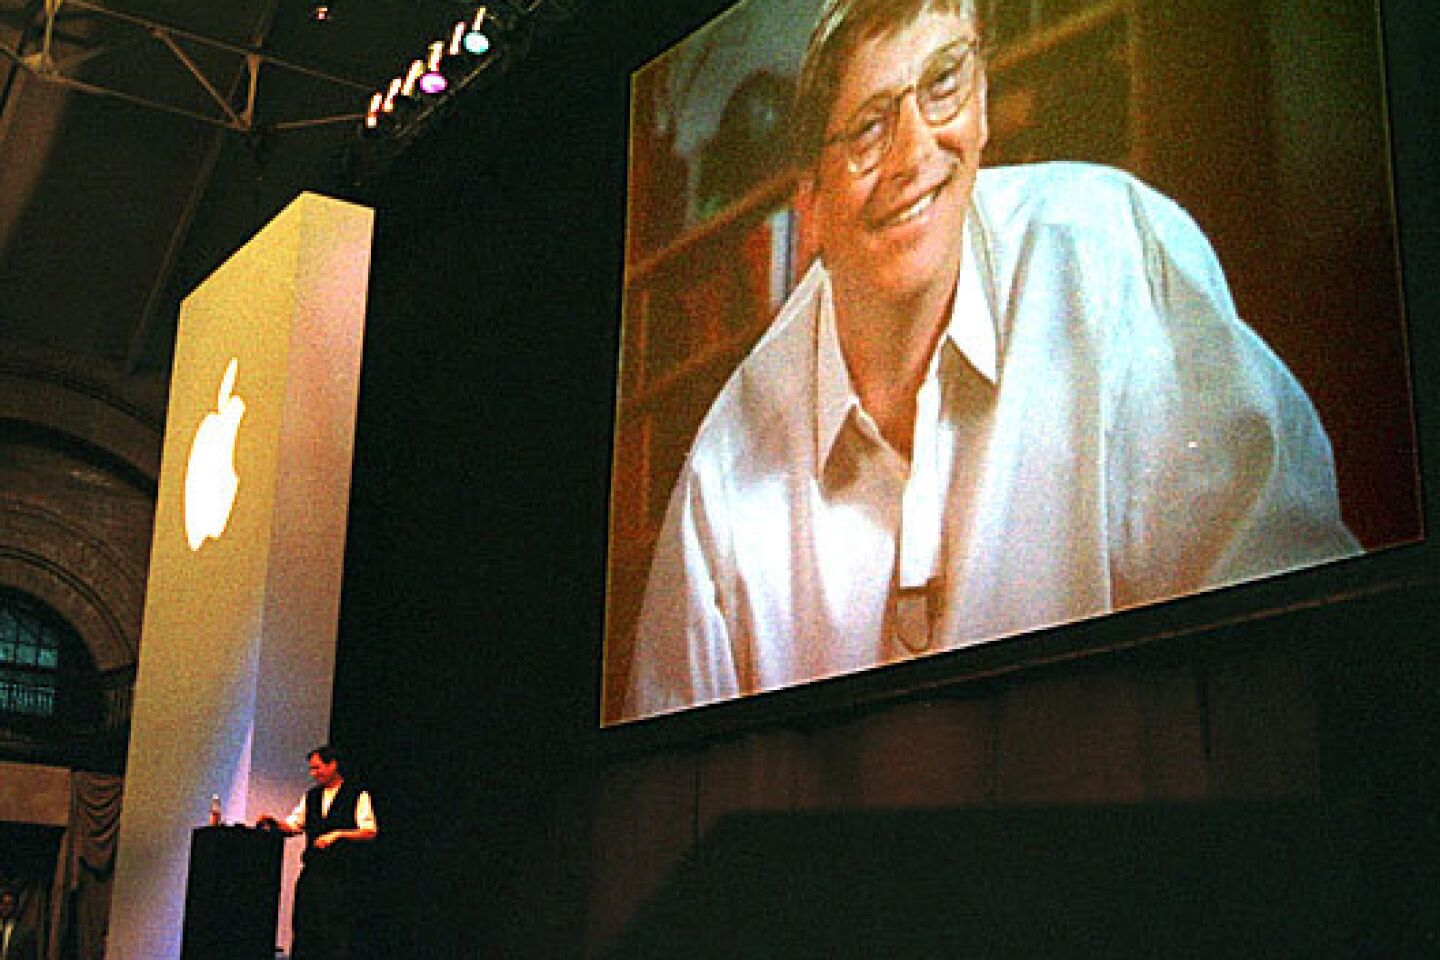 The industry was shocked when Jobs announced that the struggling Apple had forged an alliance with its sworn enemy, Microsoft. At the 1997 Macworld Expo trade show, Microsoft Chief Executive Bill Gates chimes in via satellite.